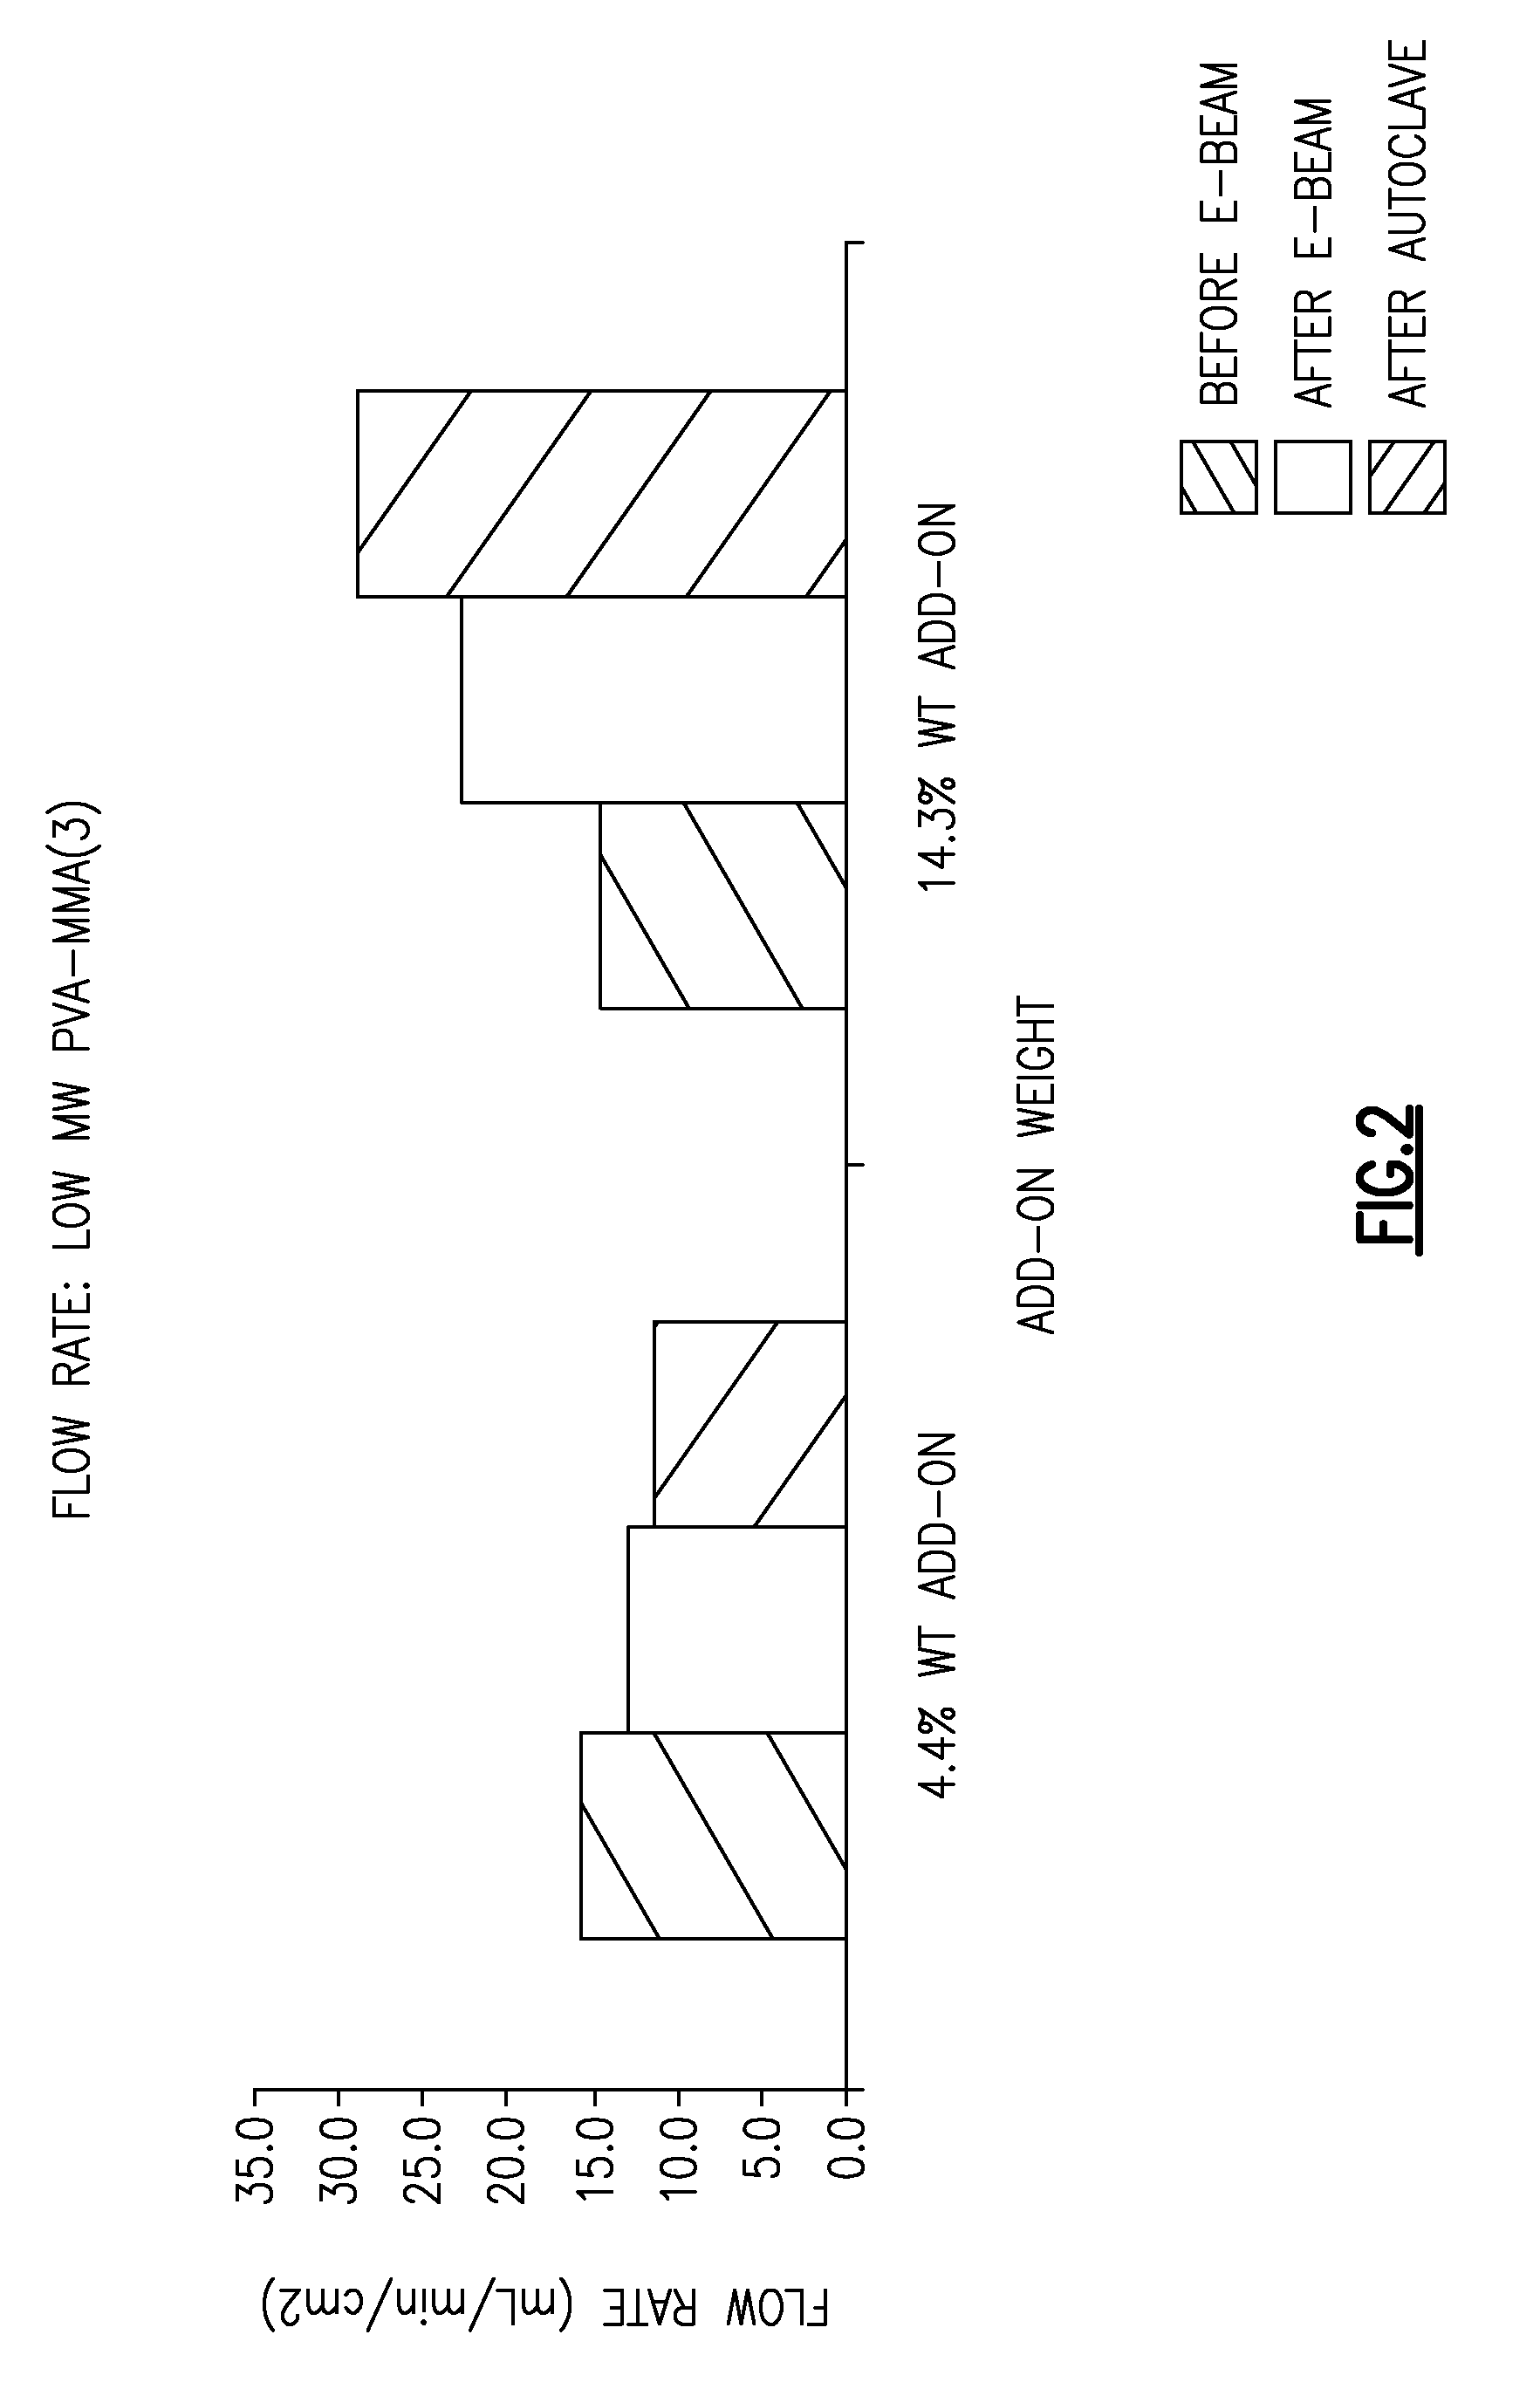 Permanent hydrophilic porous coatings and methods of making them